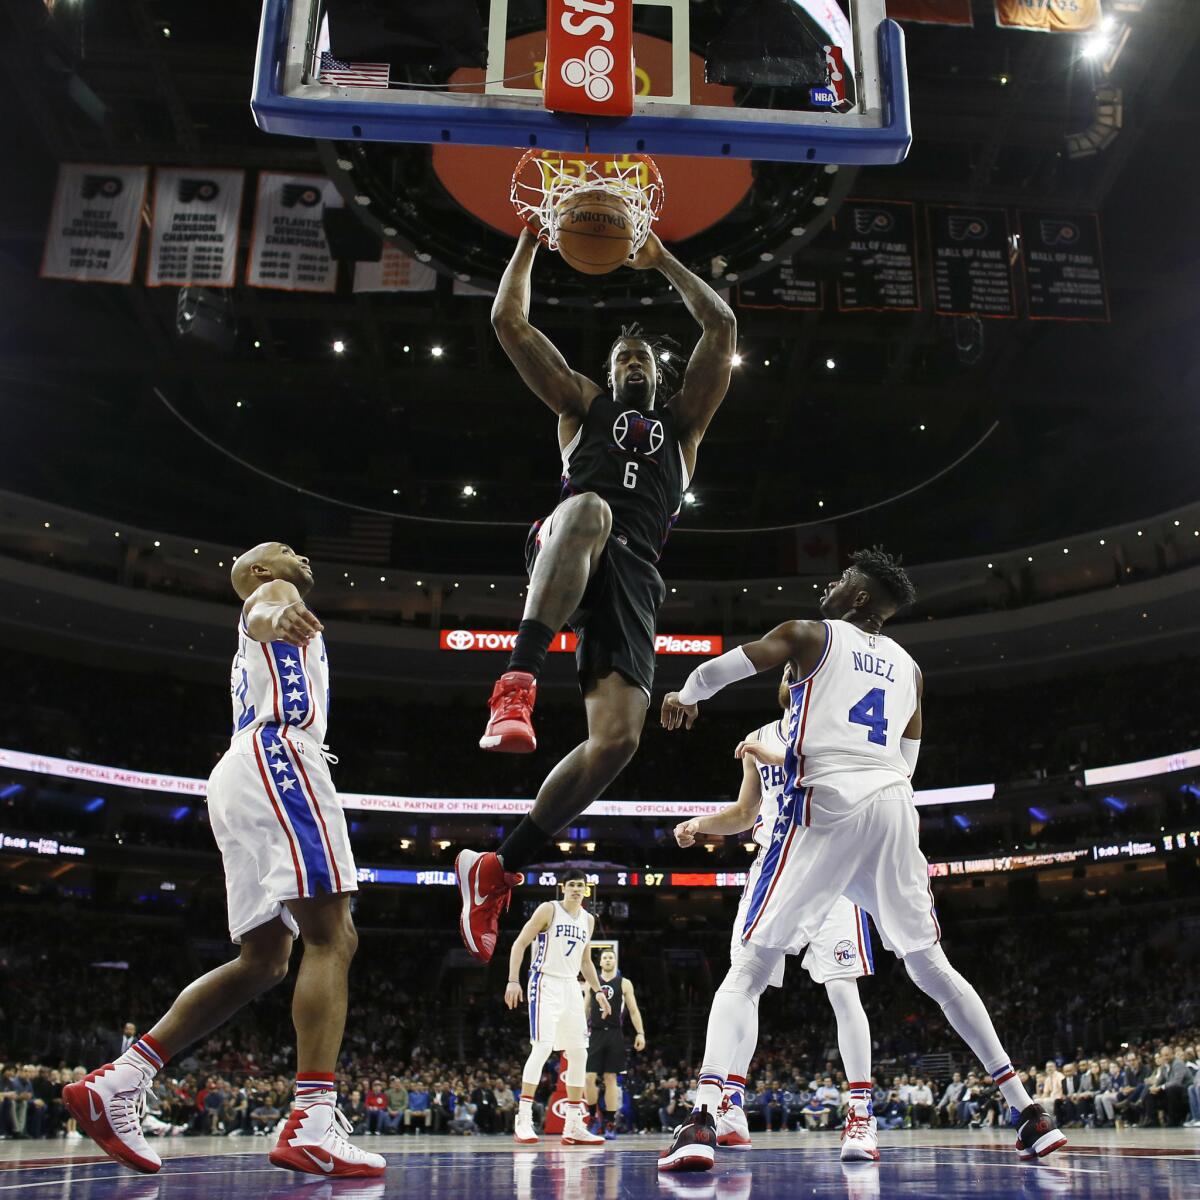 Clippers center DeAndre Jordan (6) dunks the ball as 76ers' Nerlens Noel and Gerald Henderson, left, watch during a game Jan. 24.